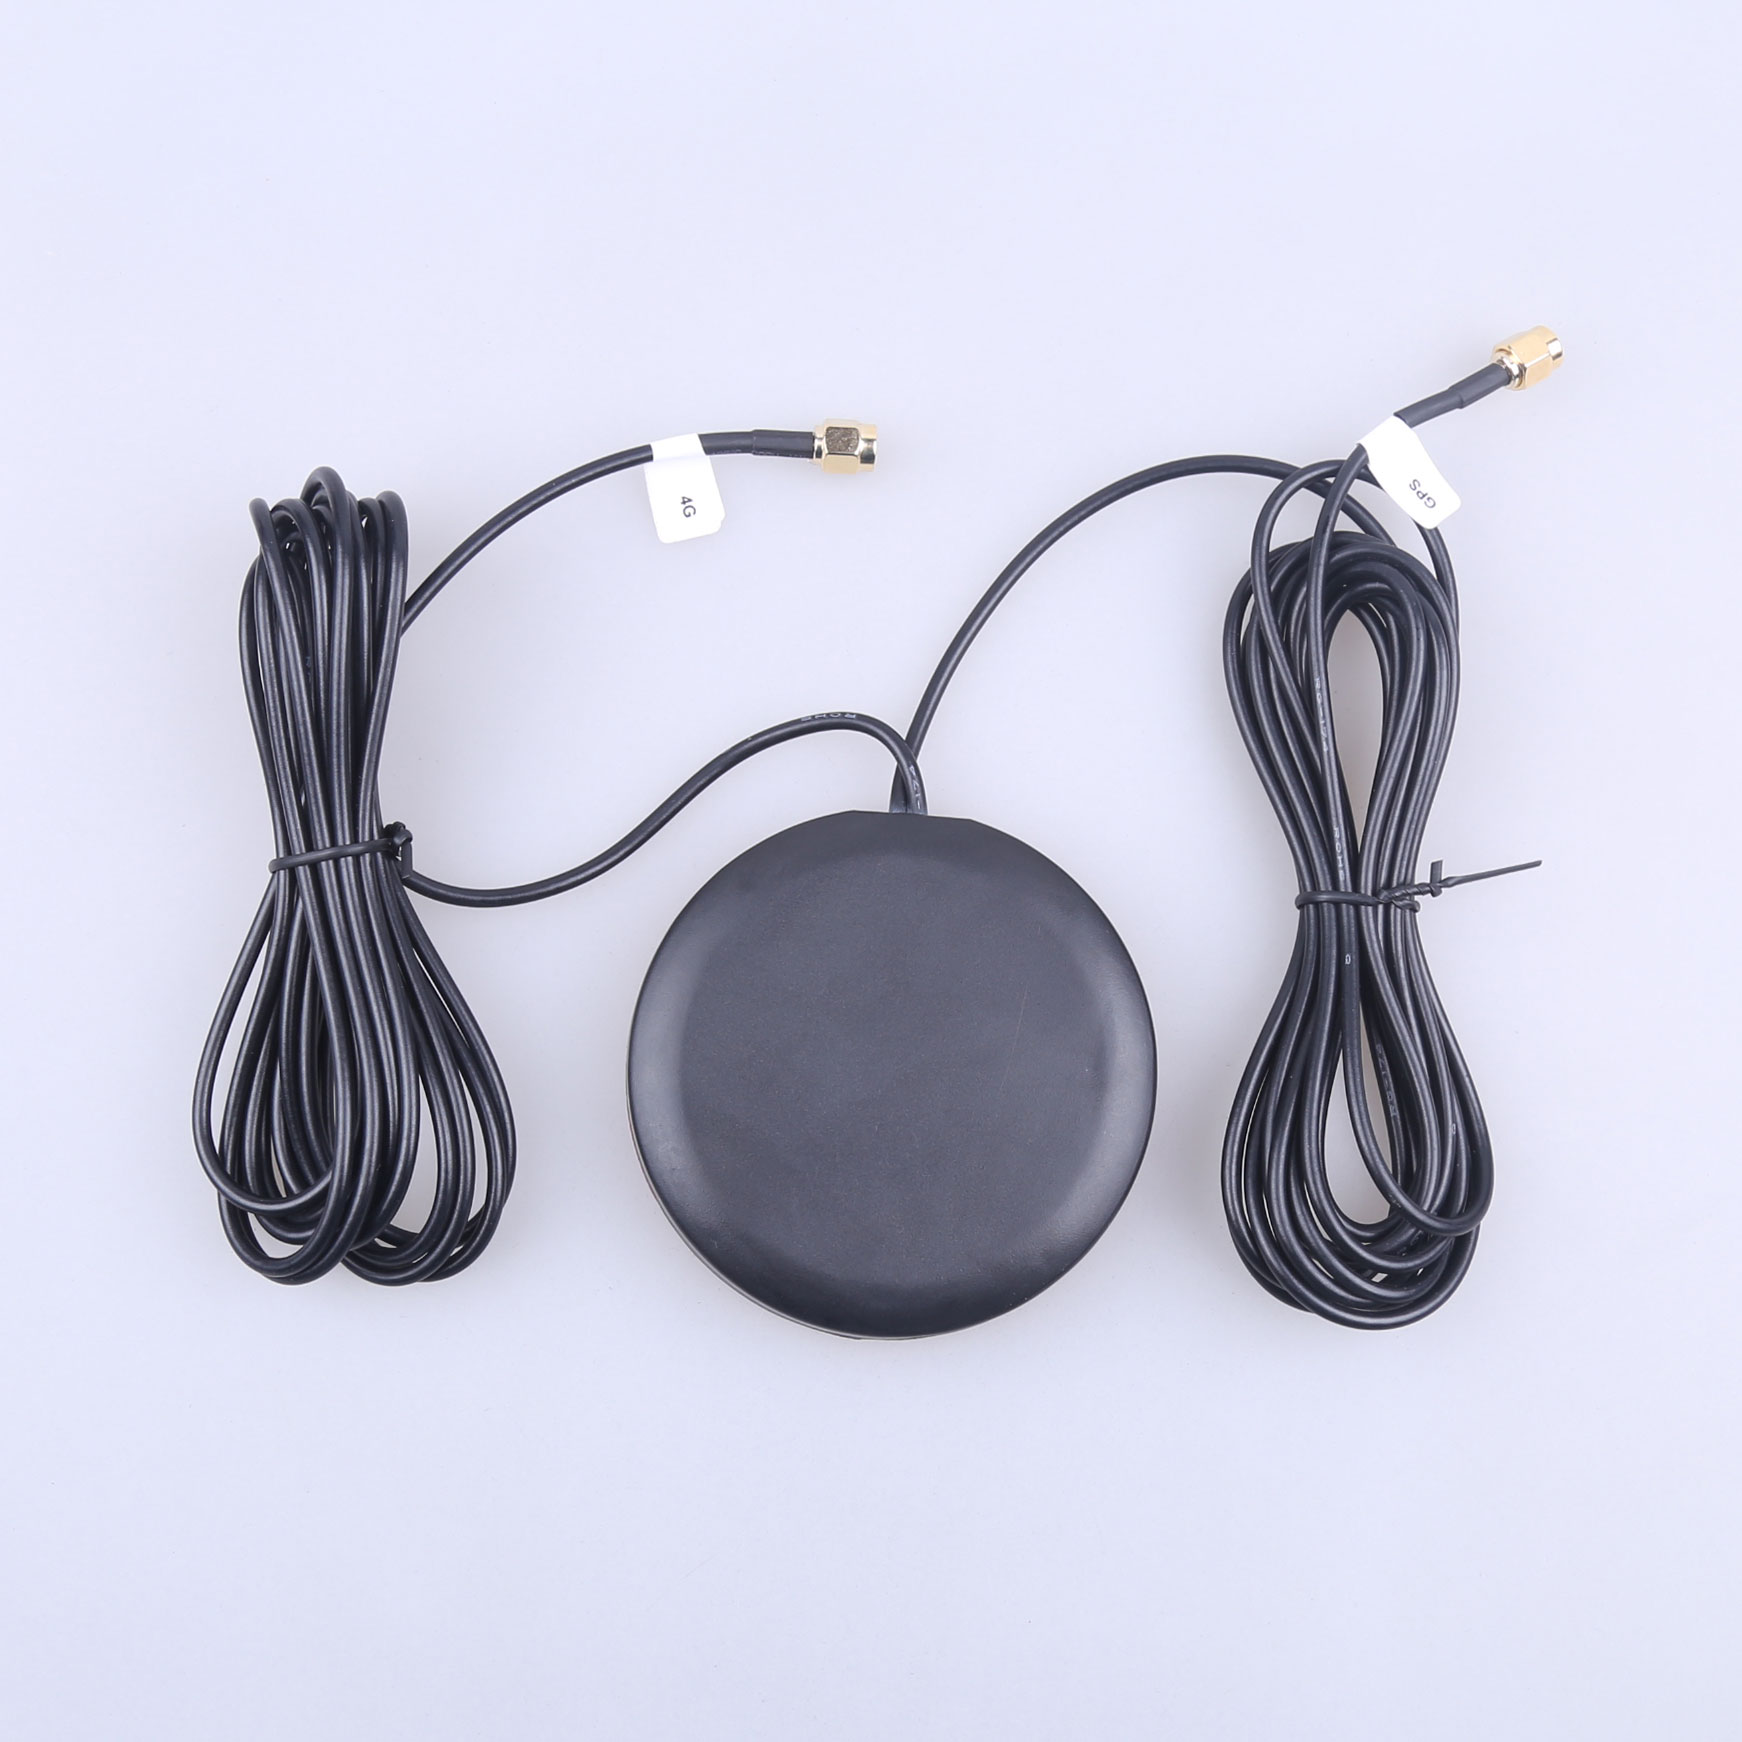 Kinghelm GNSS Glonass Antenna 4G Communication+GPS Positioning Two-in-one Outer Disc-KH1 (G4) C100-B02